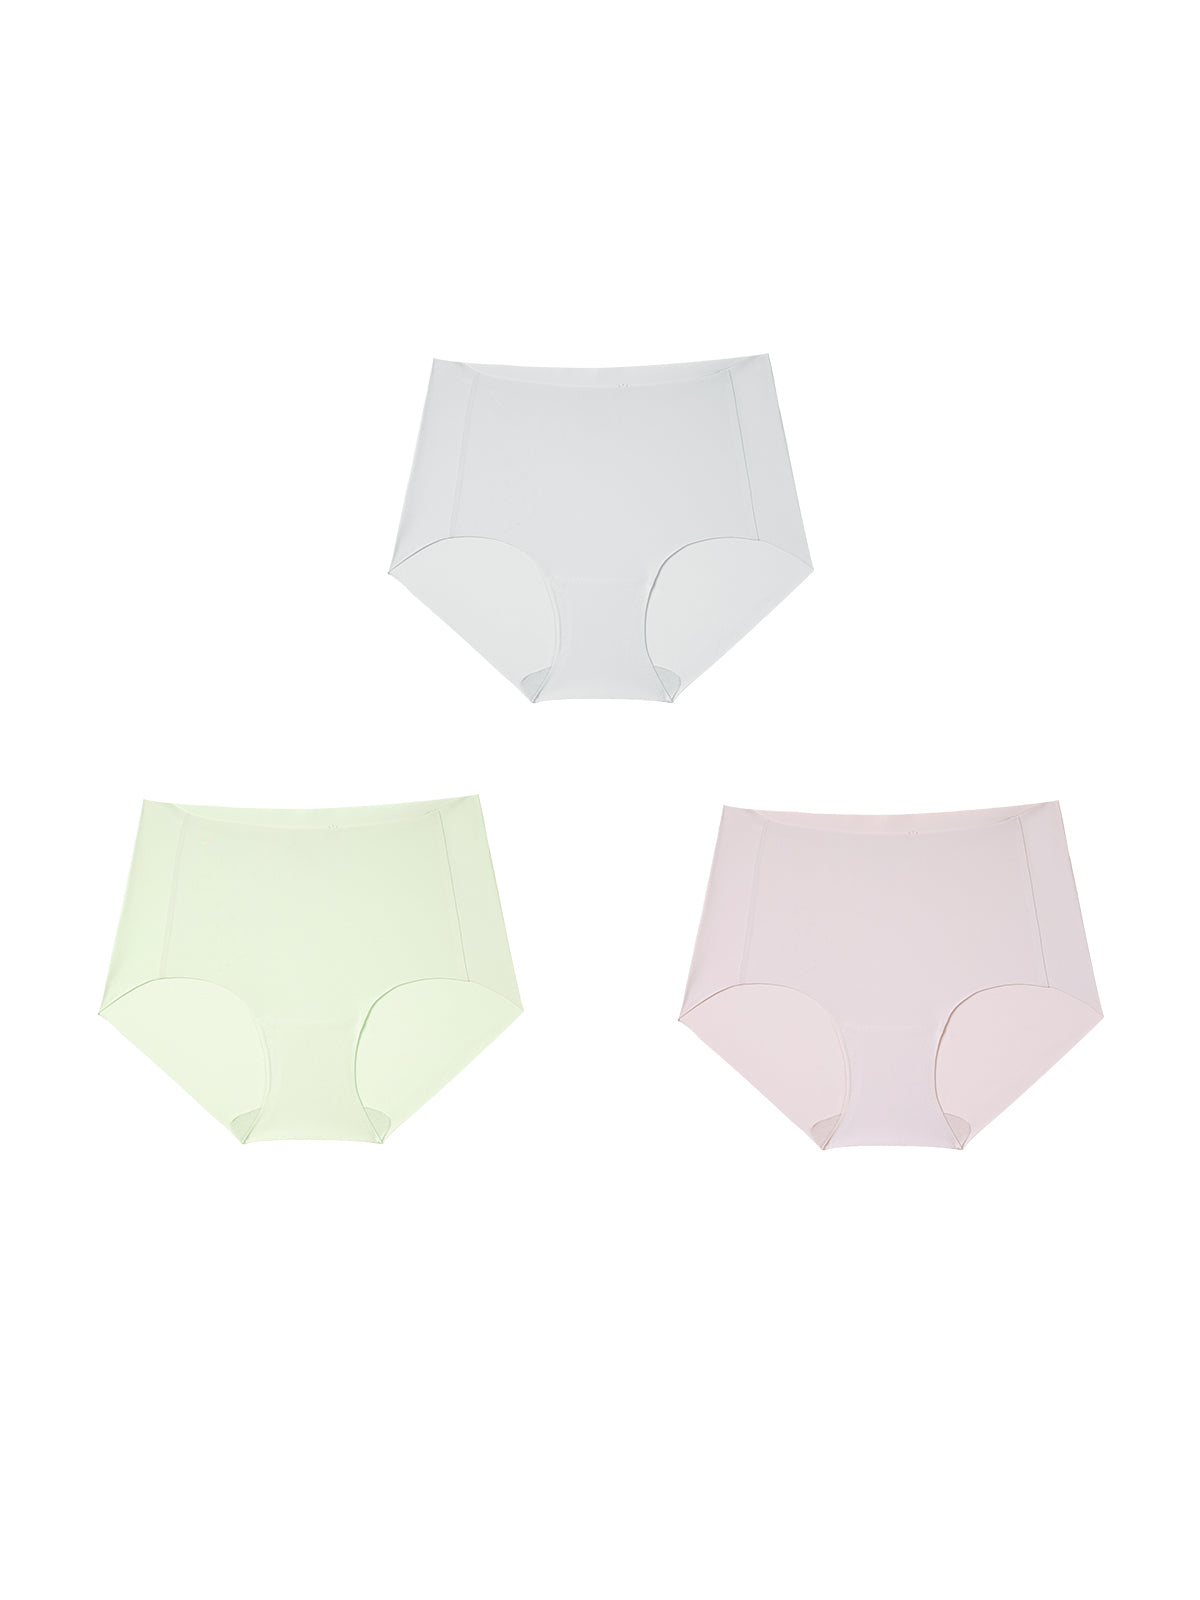 24H Comfort One Size Cooling Mid Waist Brief Kit of 3